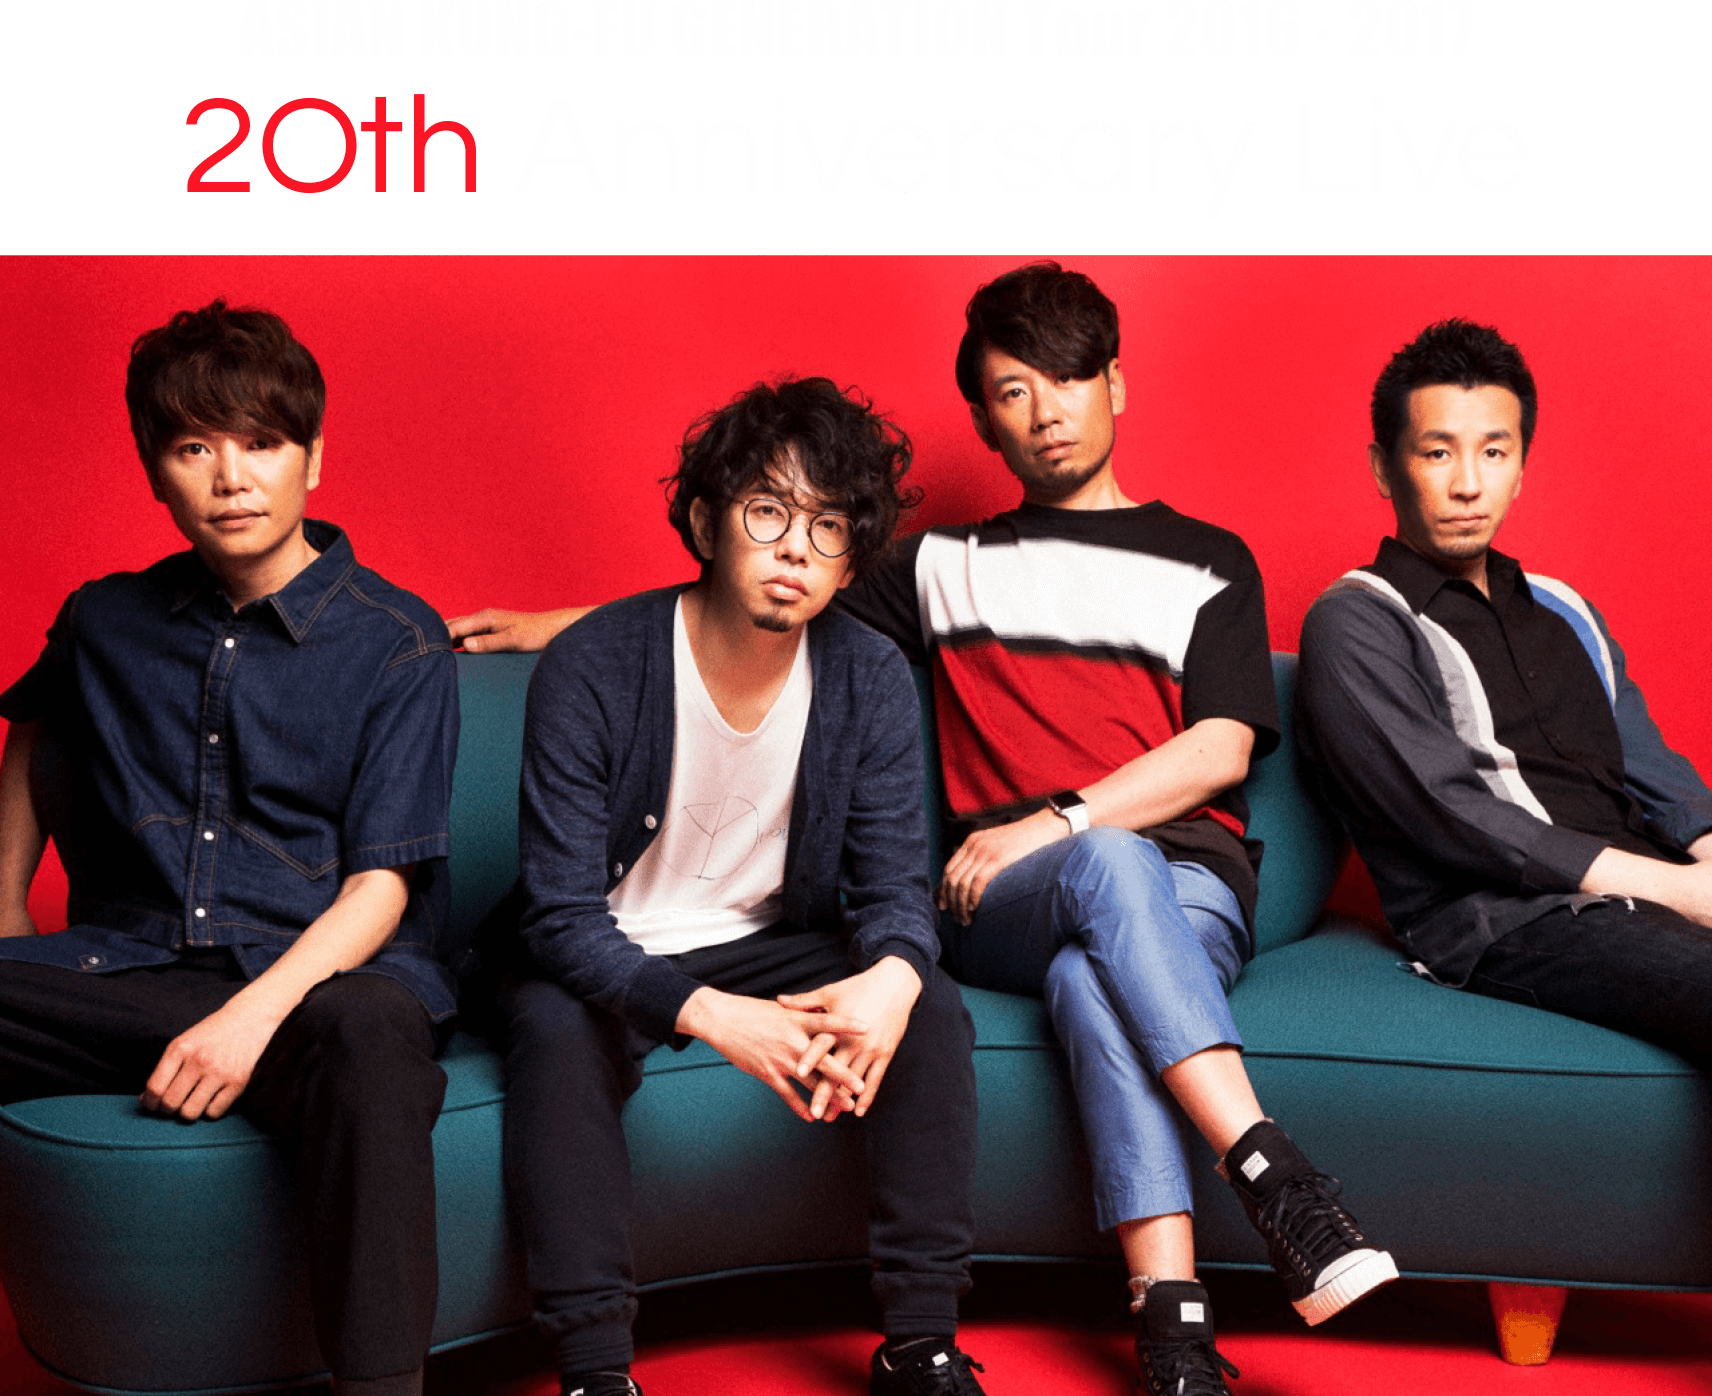 ASIAN KUNG-FU GENERATION Tour 2016-2017 20th Anniversary